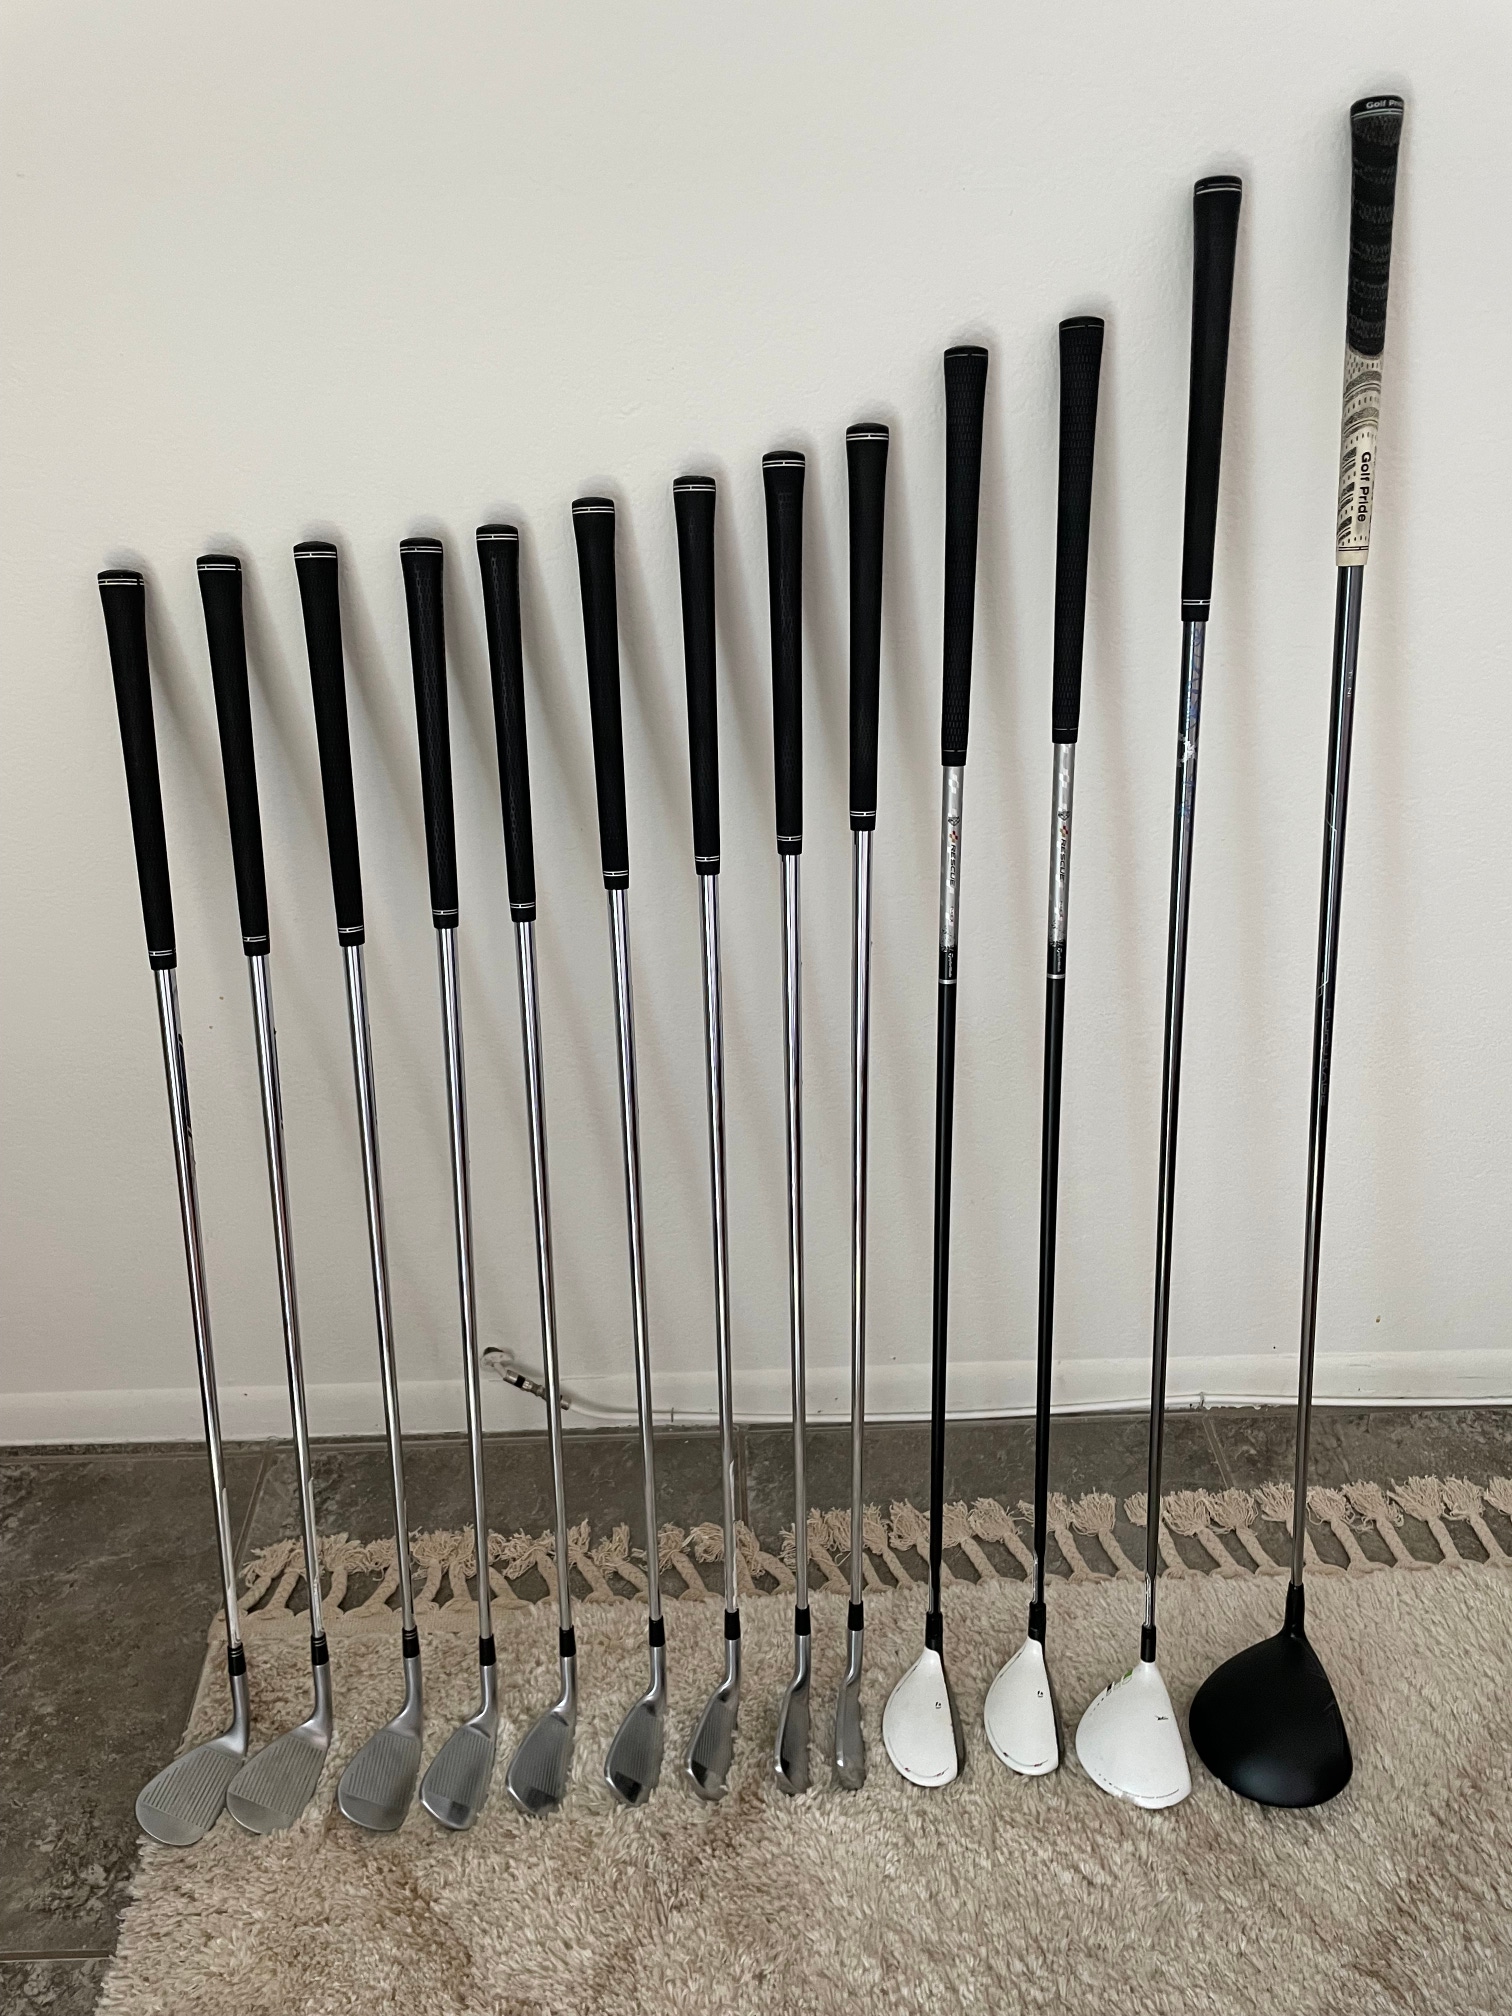 Used Men's TaylorMade Righty Rbz 3W, Rescues, ATV wedges and MC Irons (Full Set) Stiff Flex 13 Pcs